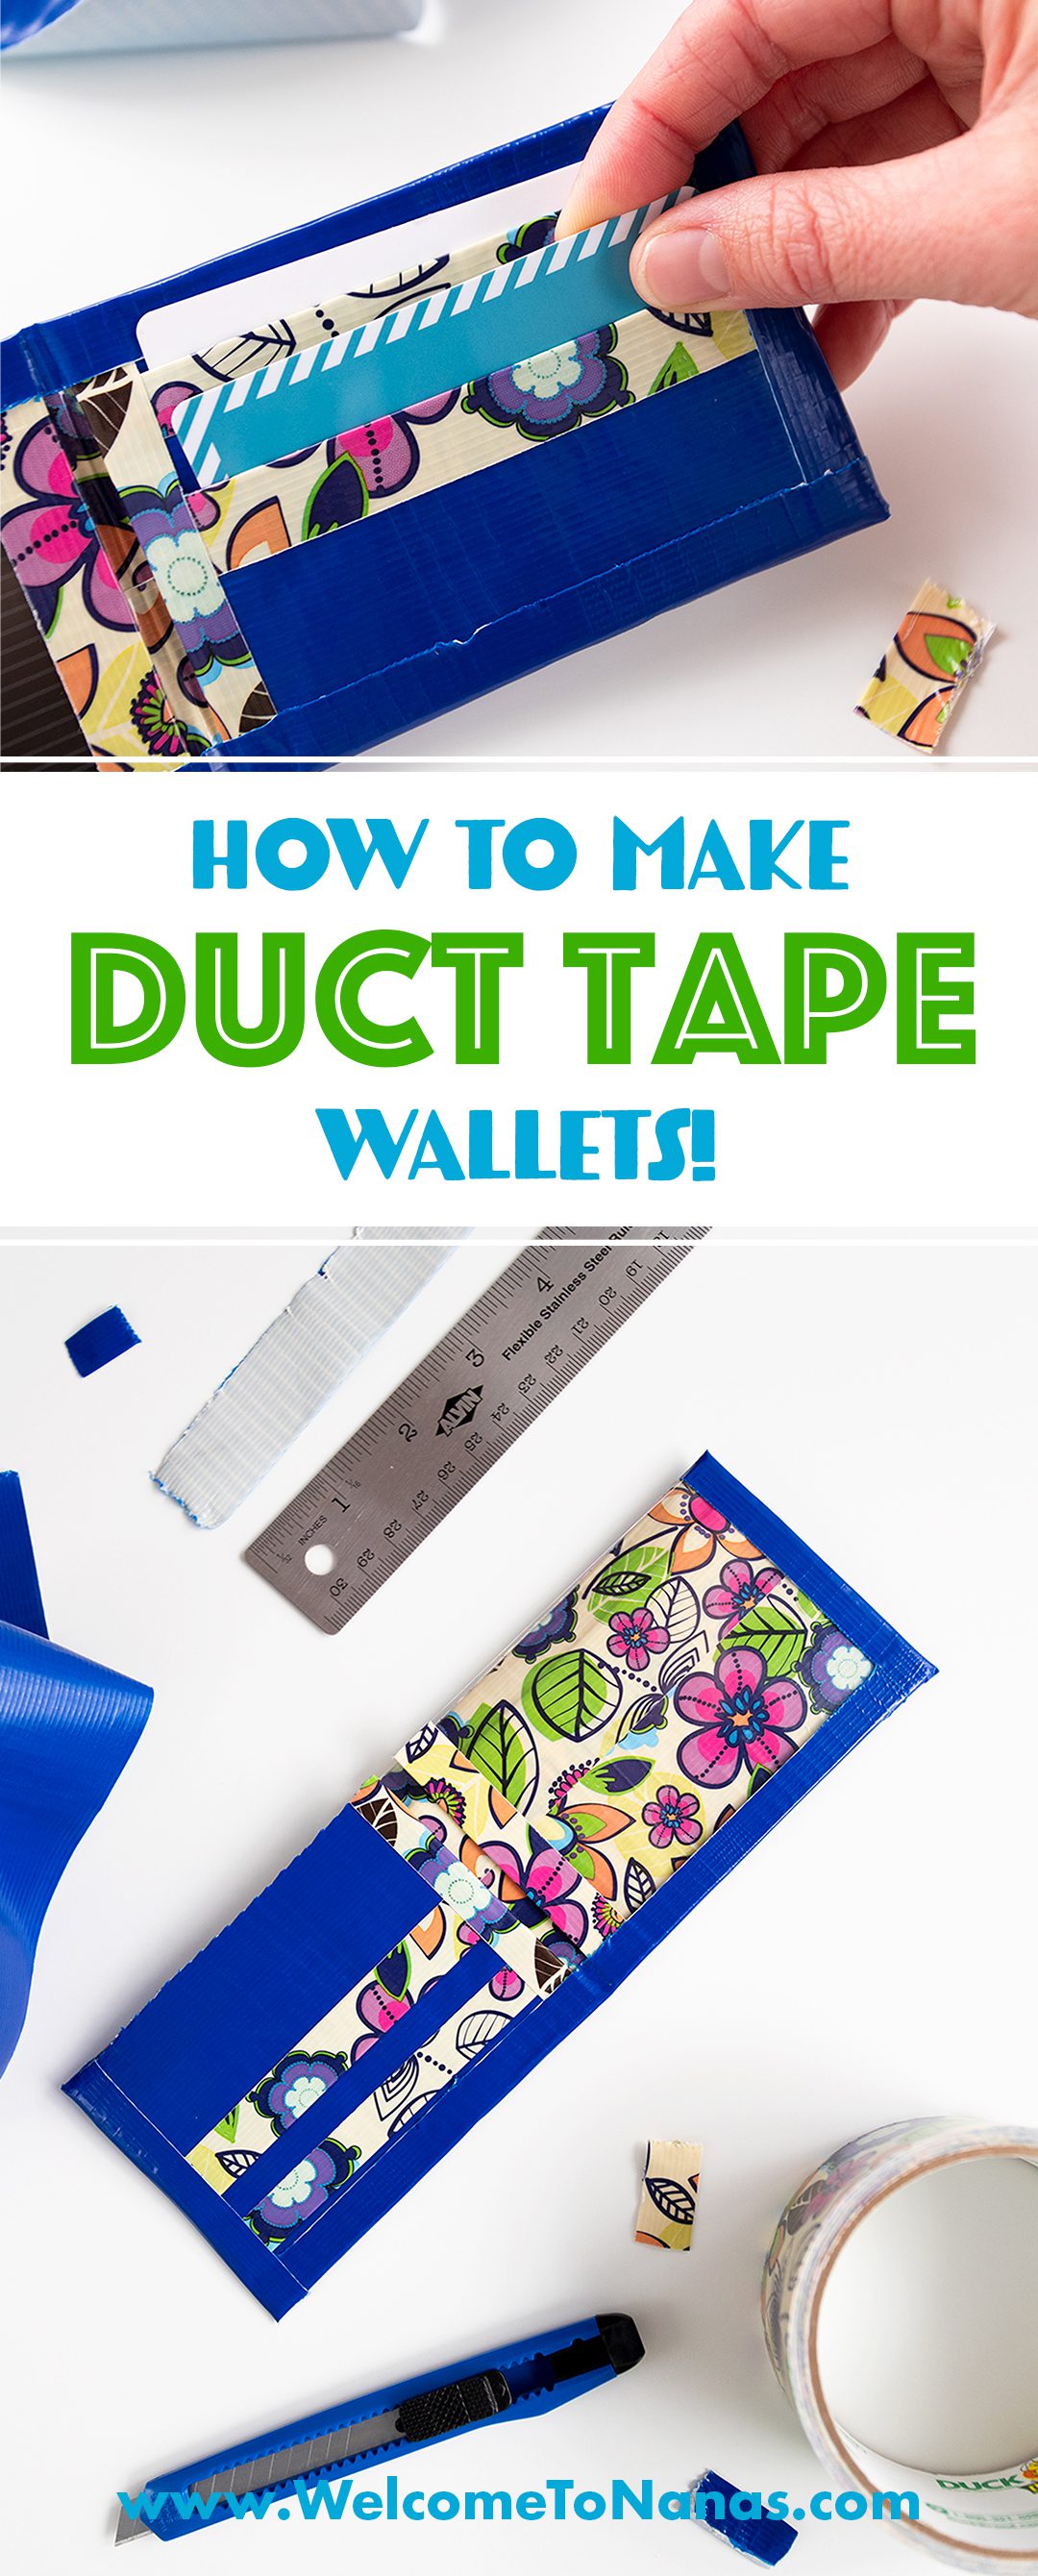 How To Make A Duct Tape Tri-Fold Wallet - video Dailymotion